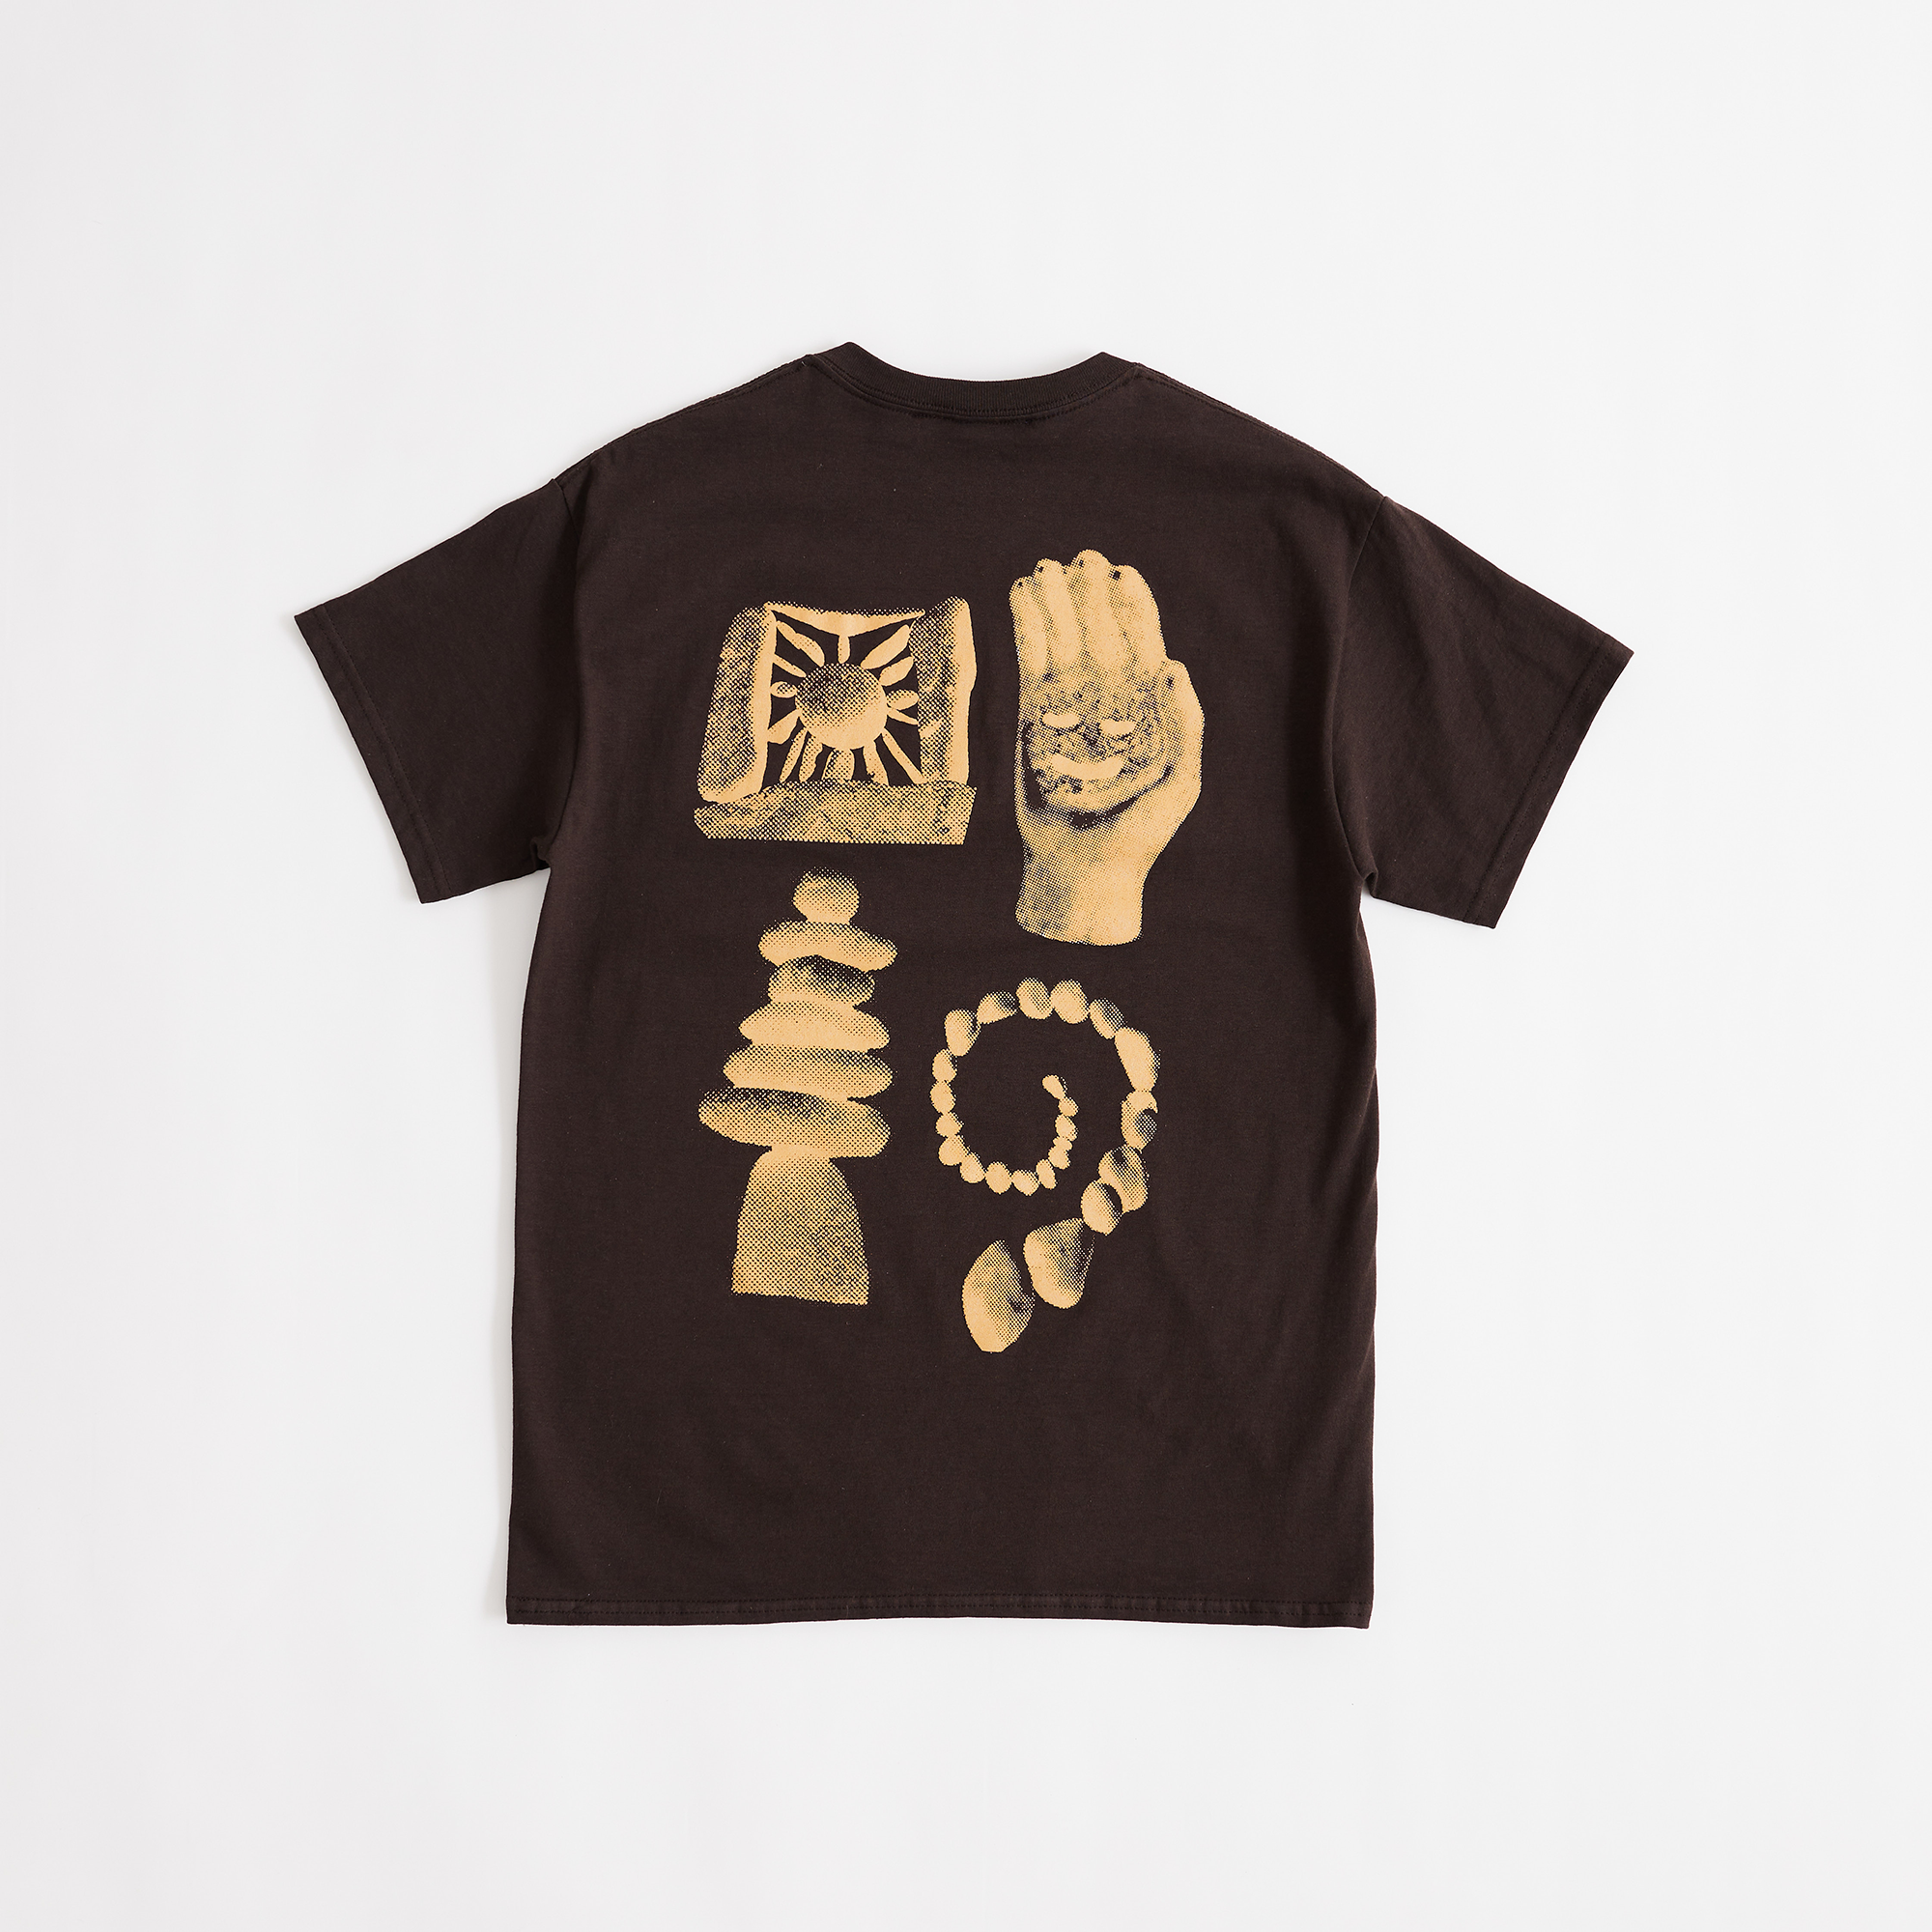 Hand of a Friend S/S T-shirt (Chocolate Brown)